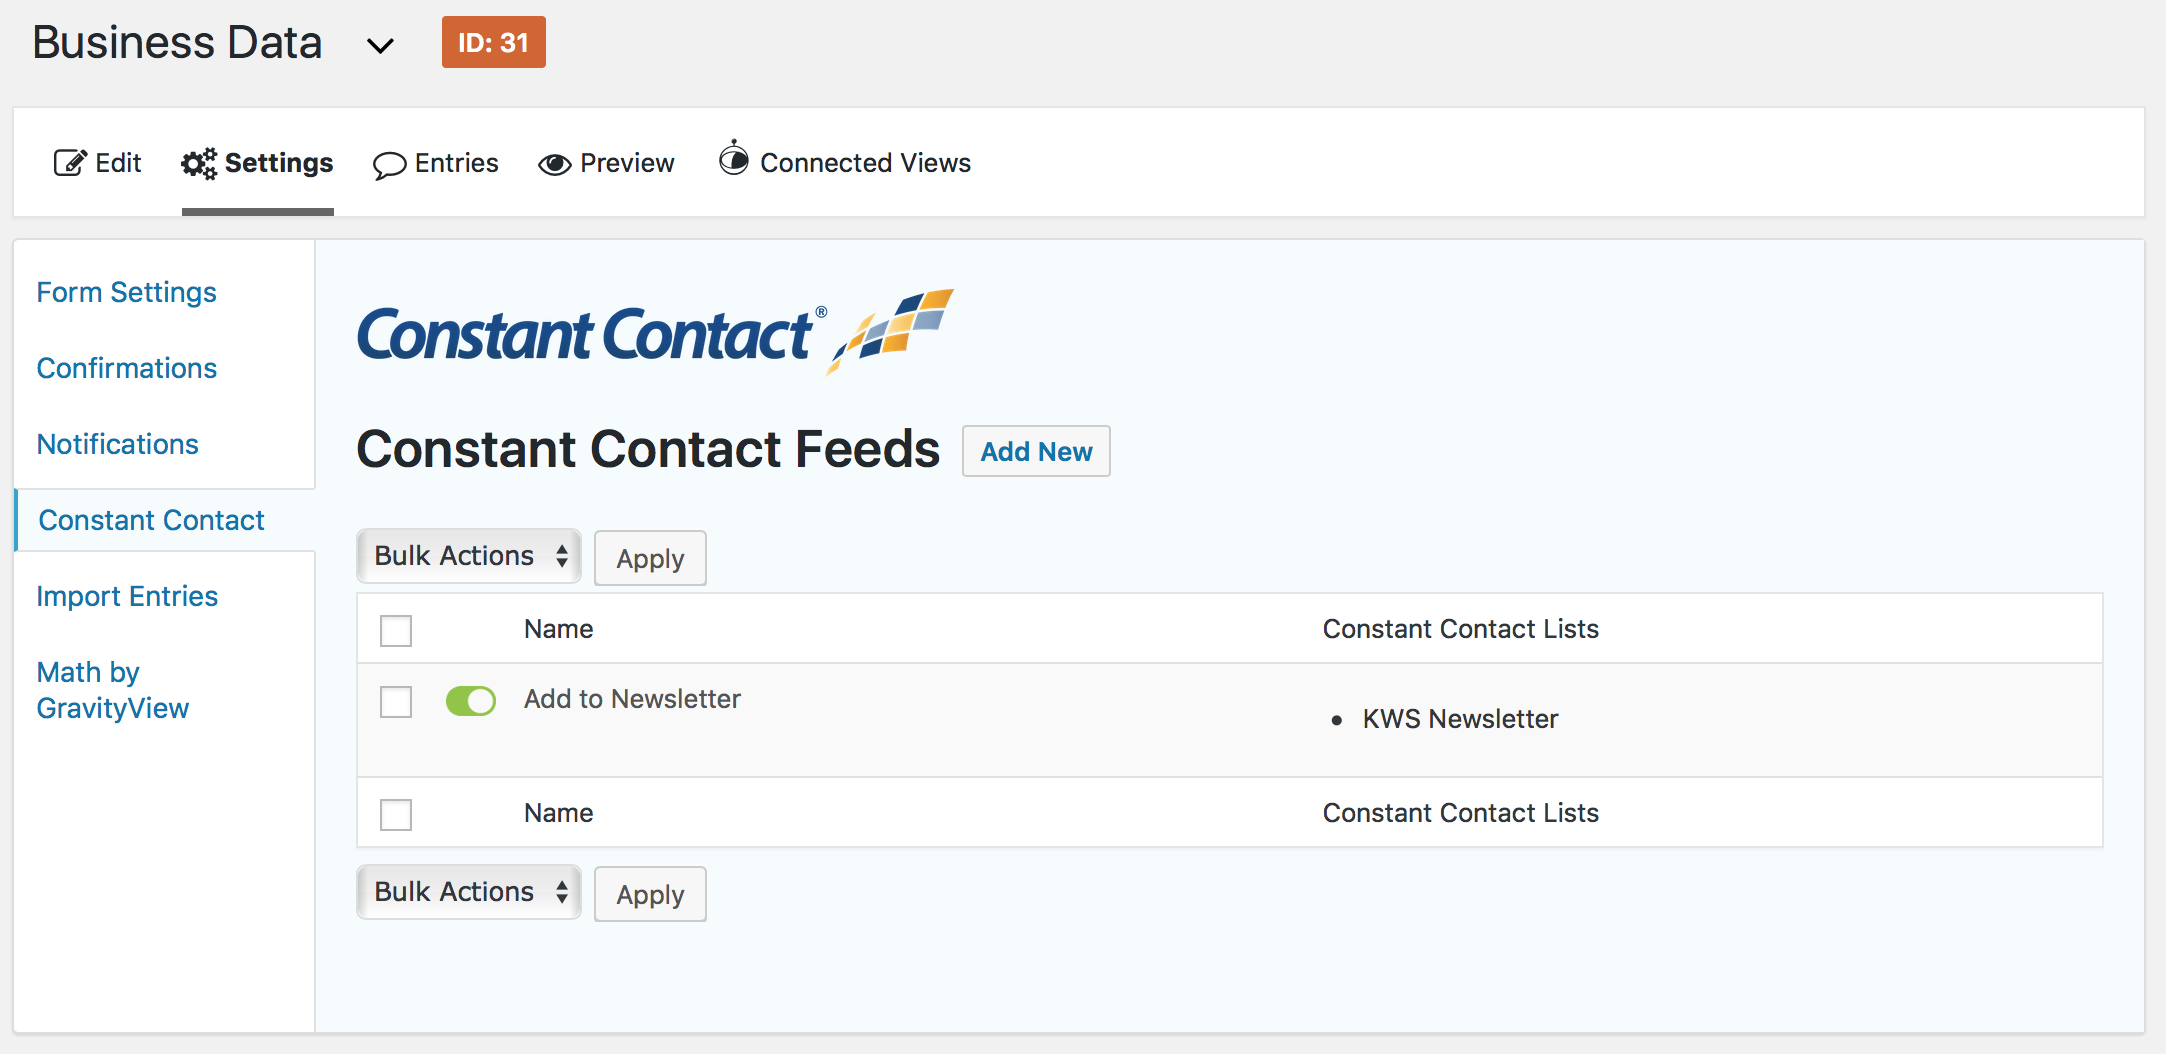 Configure one or more feeds (Constant Contact sync rules) per form